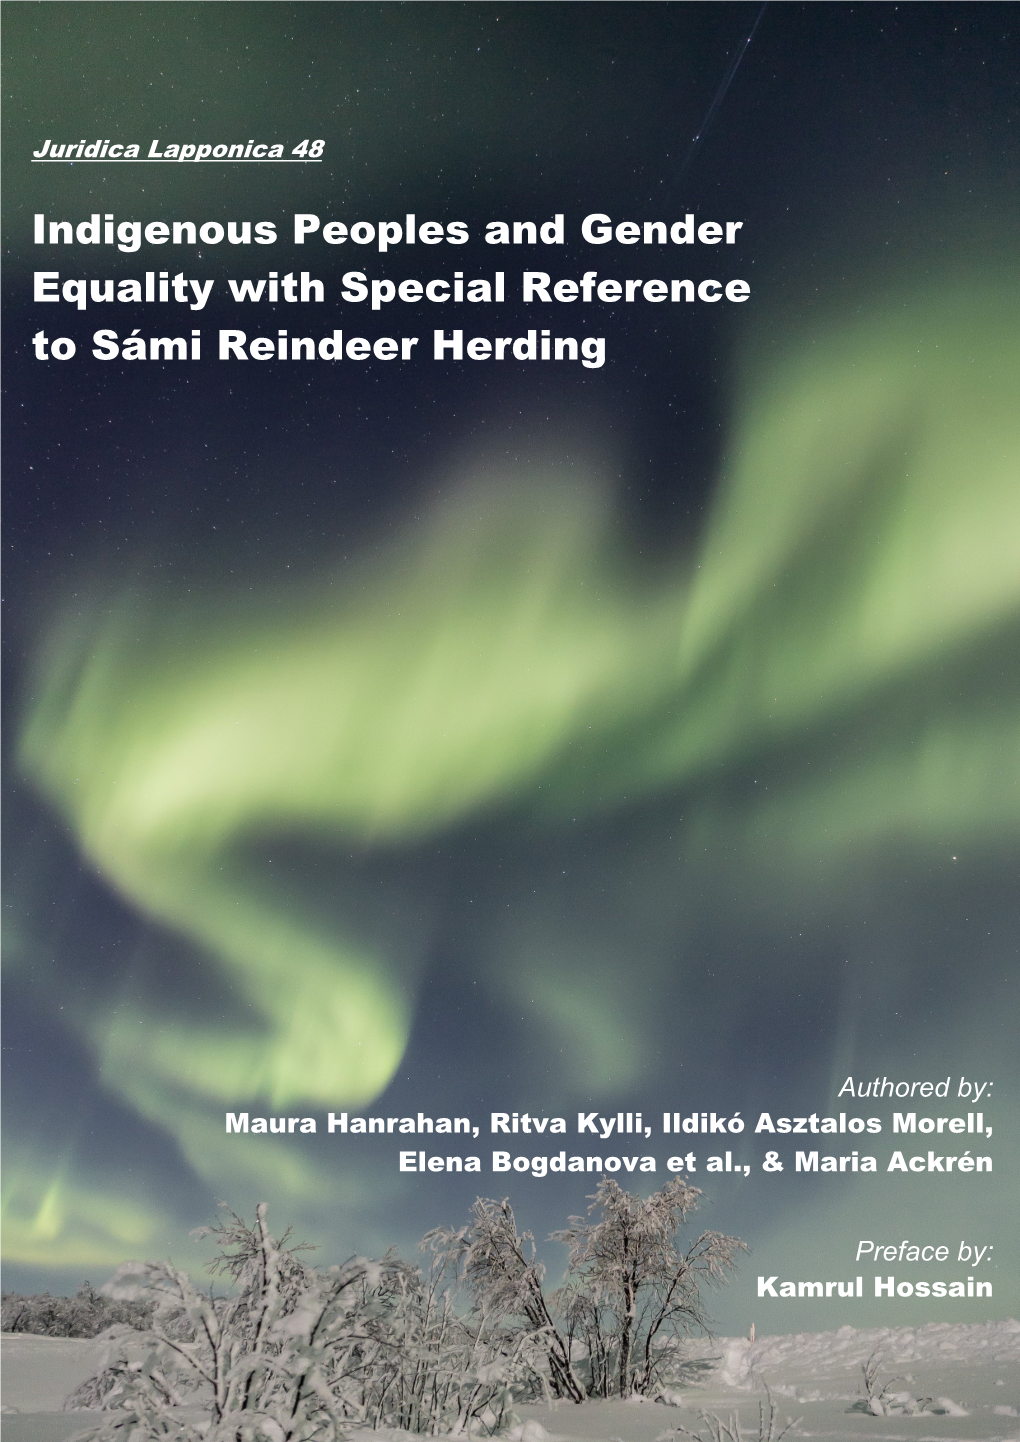 Indigenous Peoples and Gender Equality with Special Reference to Sámi Reindeer Herding